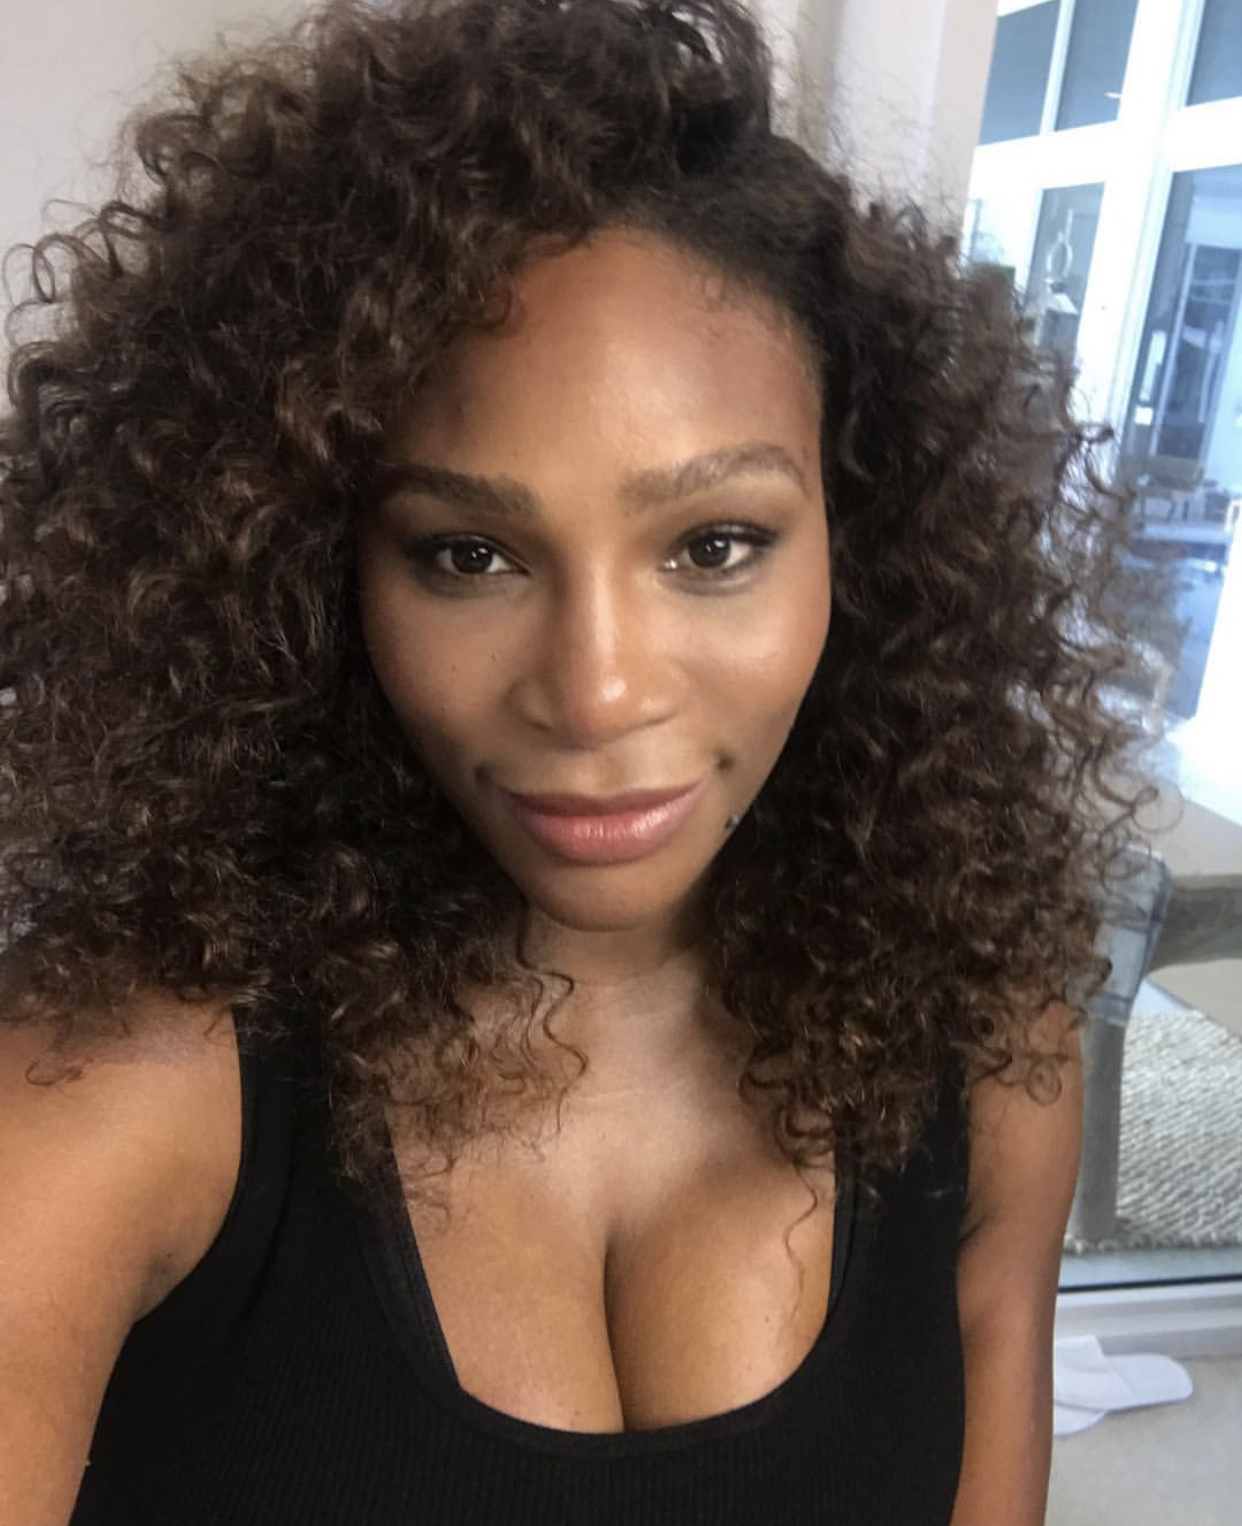 Serena Williams On The Double Standard She Faces As A Female Tennis Player